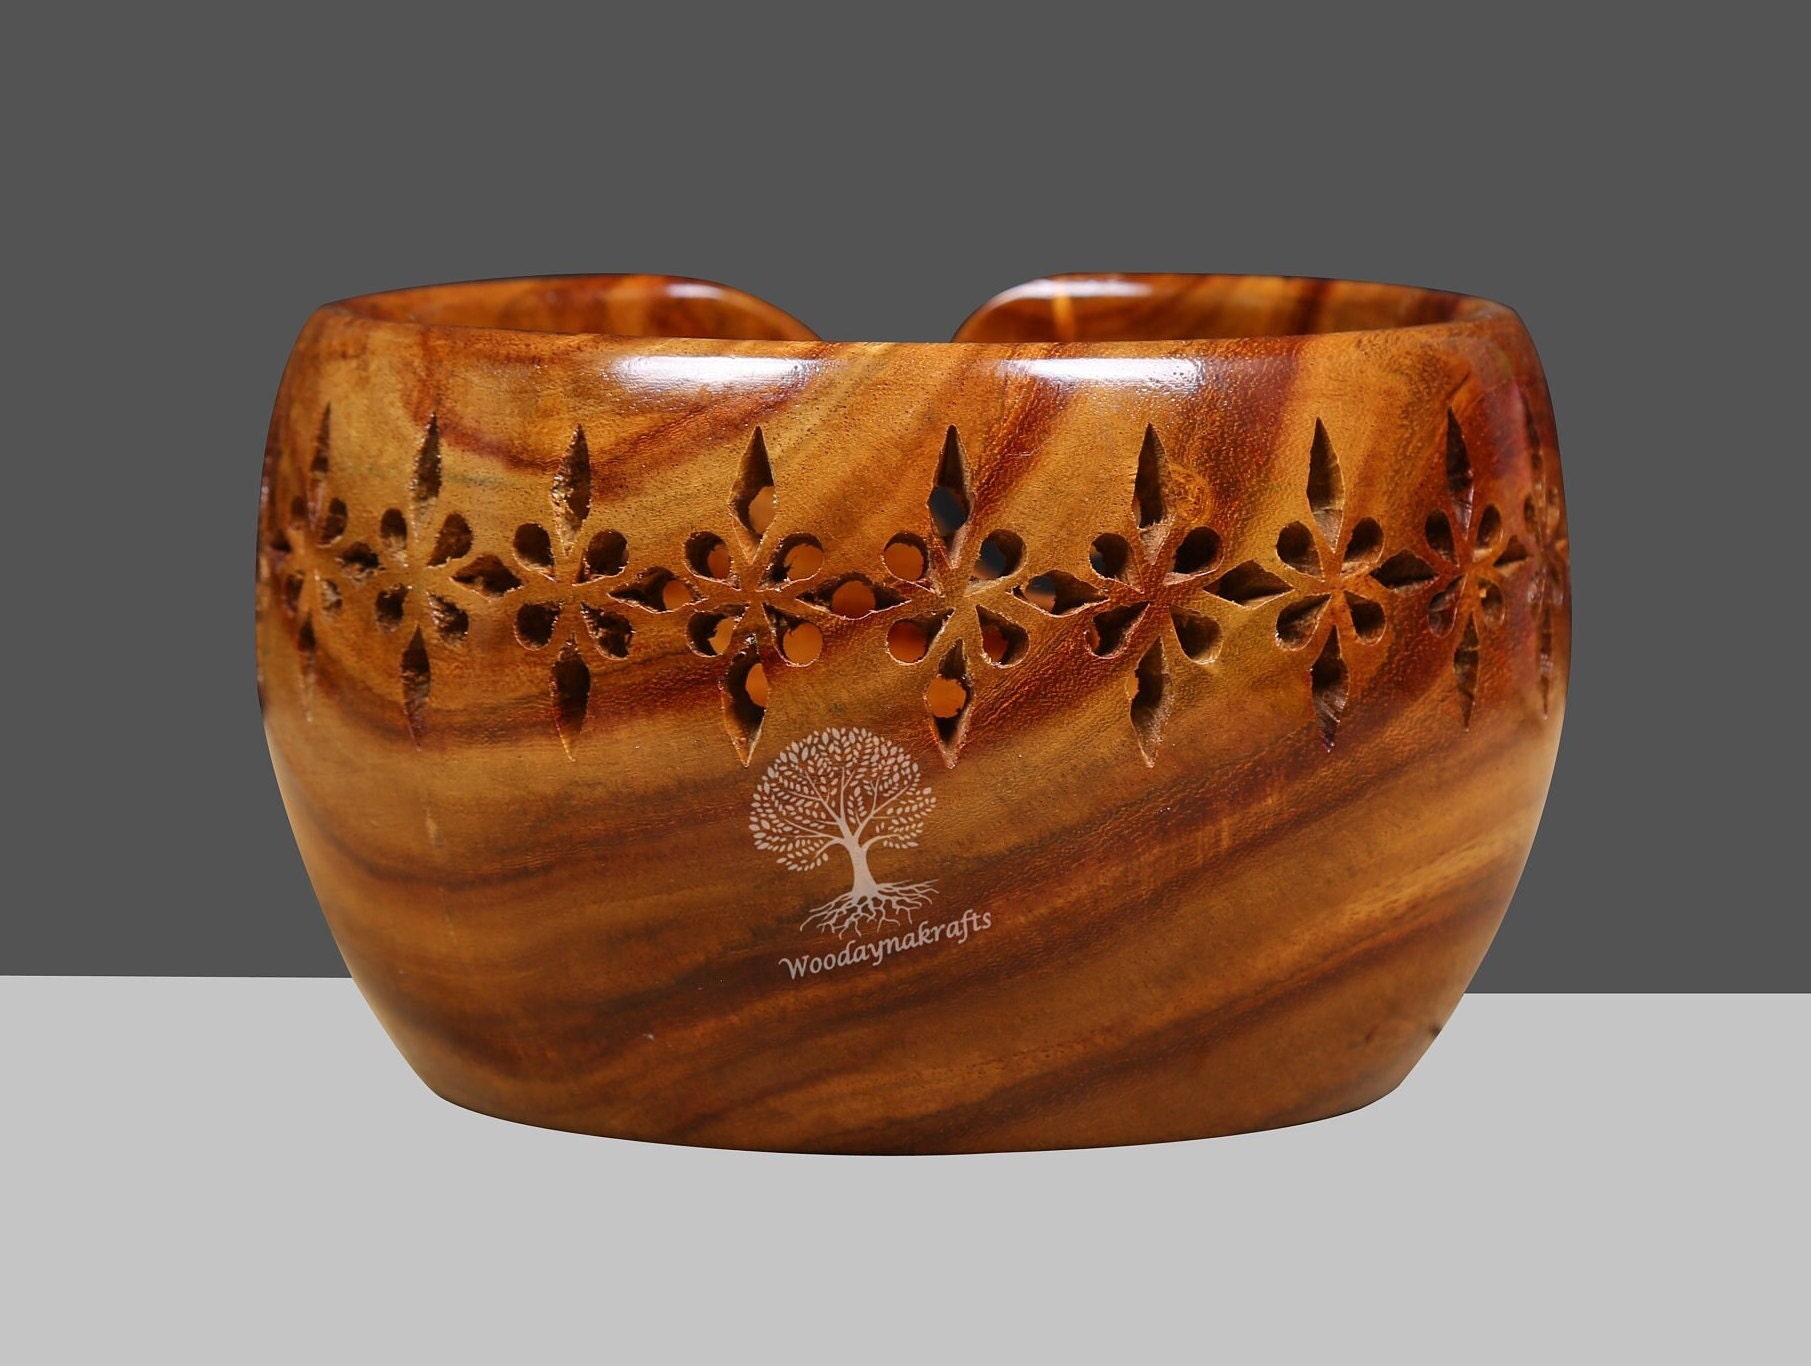  Little World Yarn Bowl - Wooden Yarn Bowls for Crocheting with  Holes, Preventing Slipping and Tangles, Handmade Craft Knitting Bowl  Mothers Day Gift for Knitting Lovers (Chestnut)